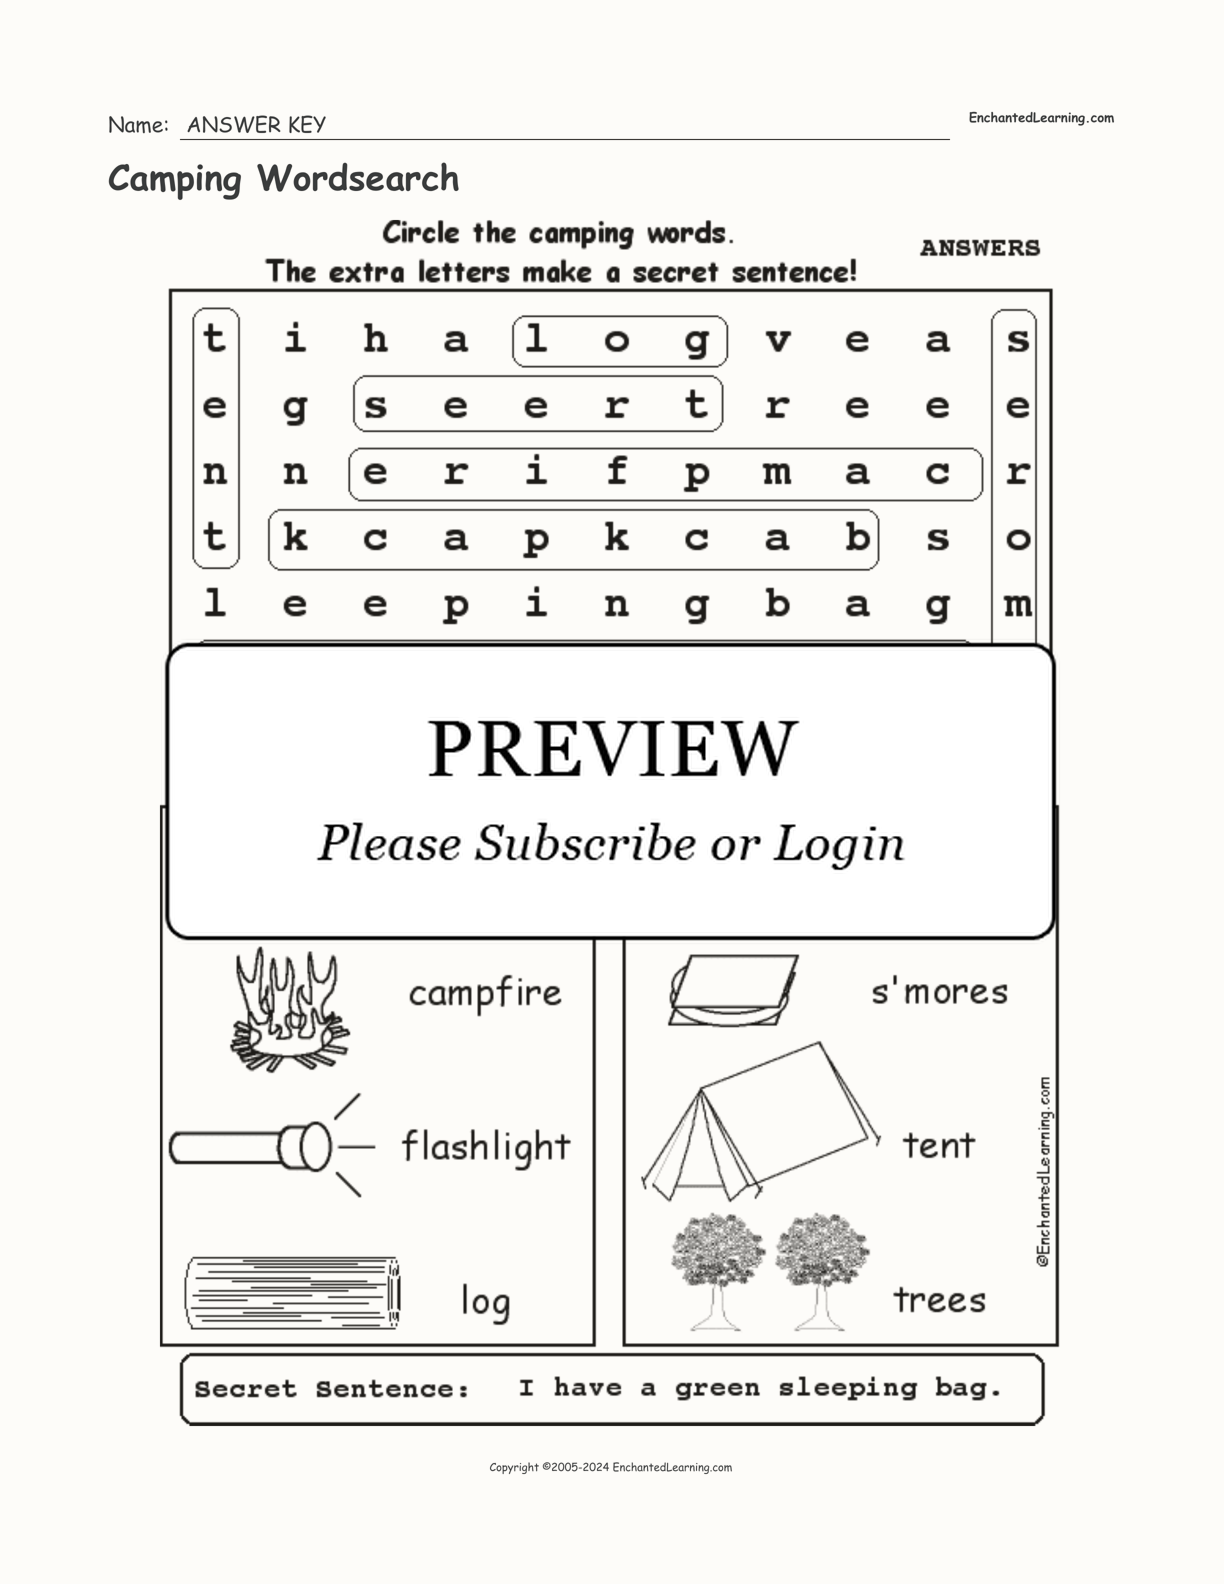 Camping Wordsearch interactive worksheet page 2